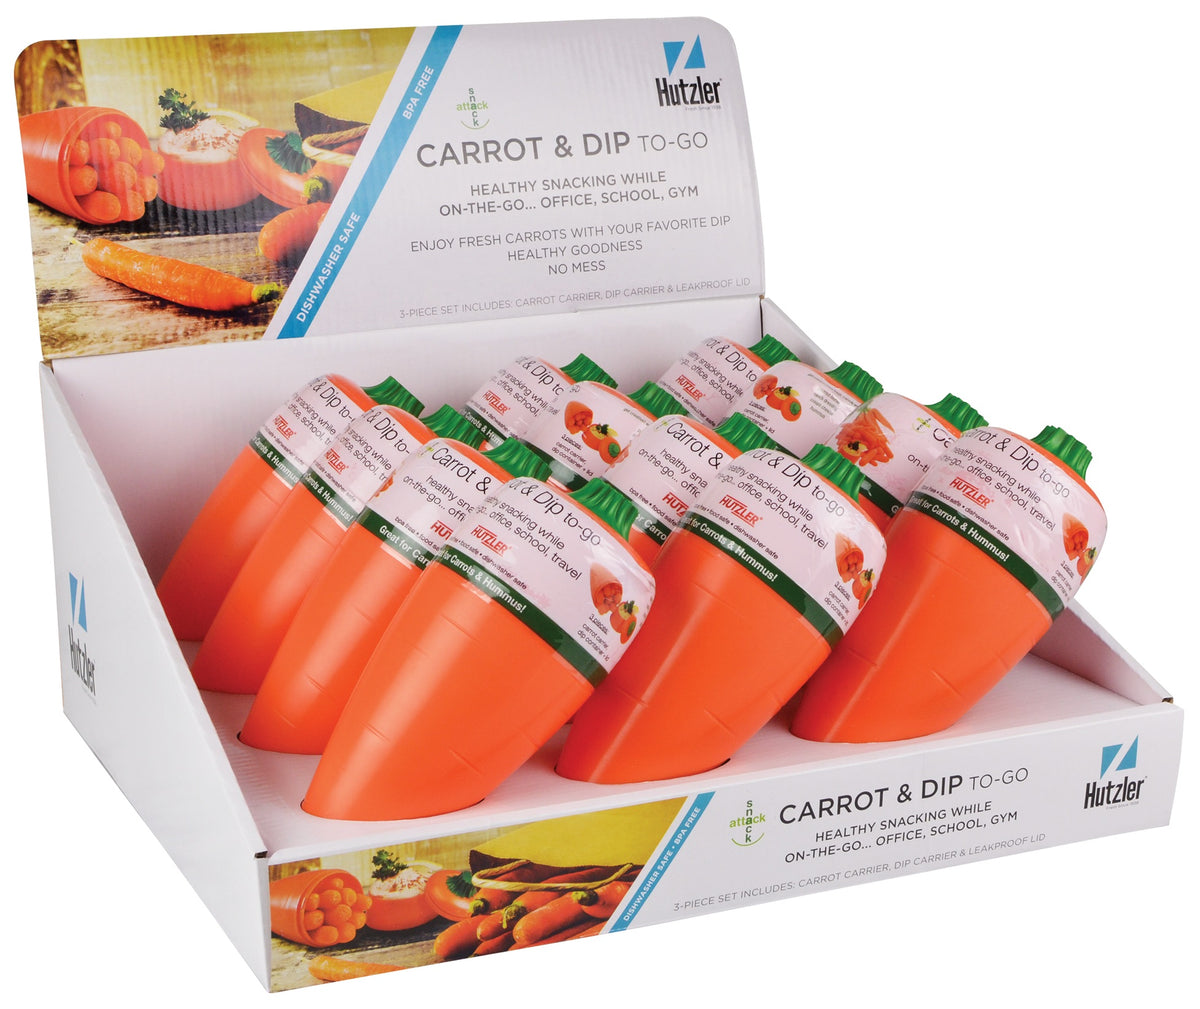 Hutzler 7079PRO Carrot & Dip To Go Snack Containers, Plastic